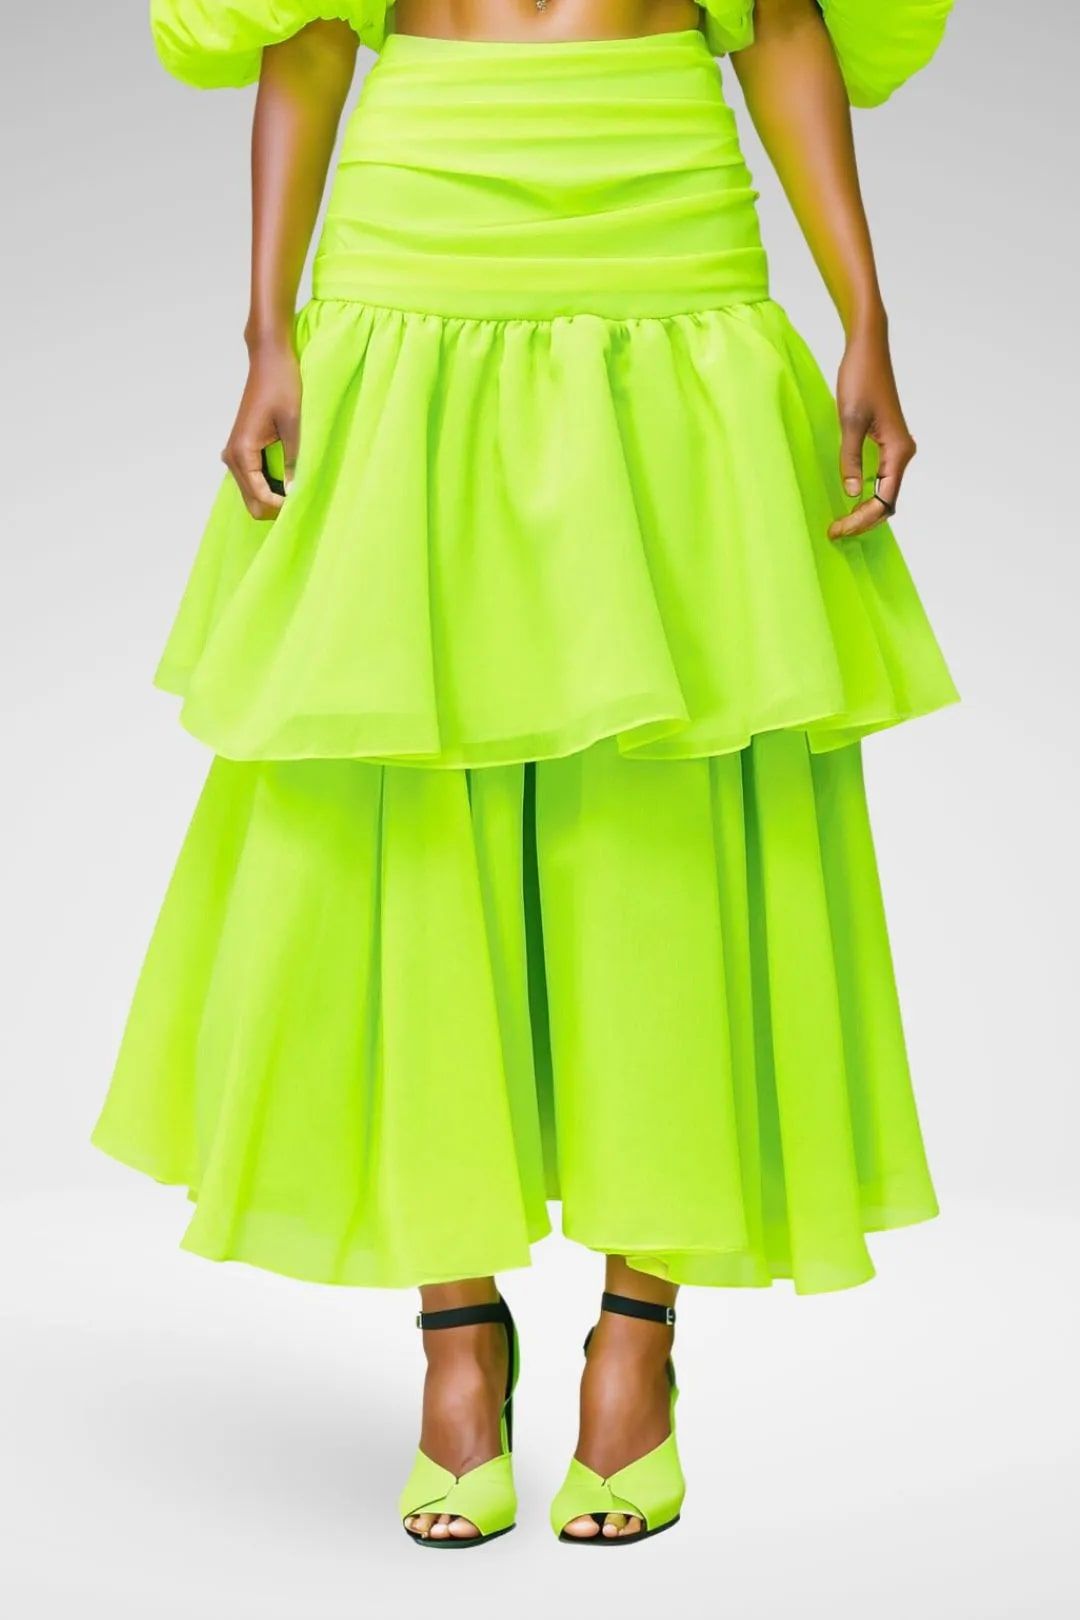 Acler Suki Skirt in Citrine, perfect for cocktail events, available for hire